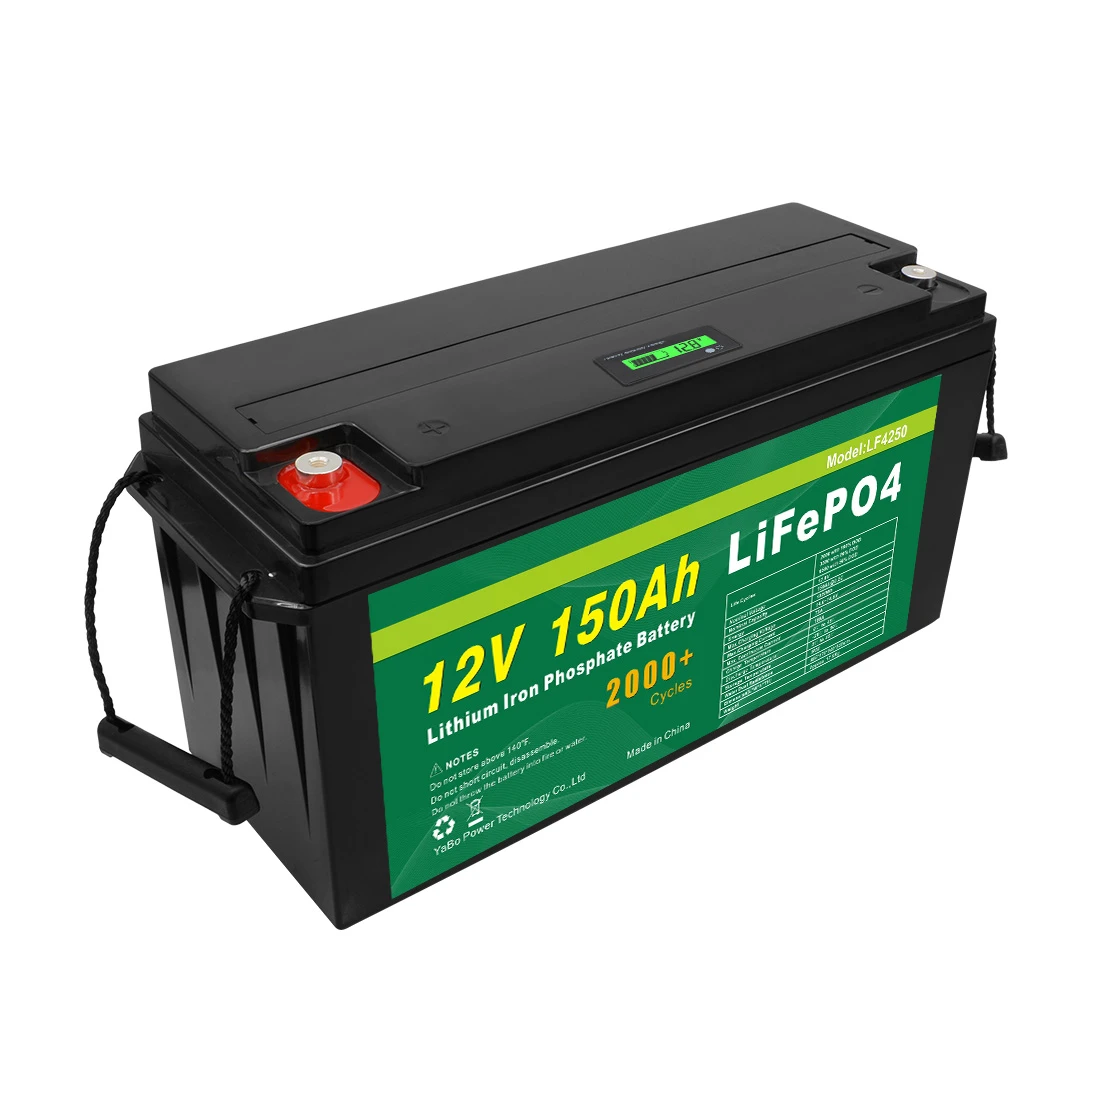 Solar Energy Storage Systems Cheap Price Make Deep Cycle 12.8V Rechargeable Li-Ion Lithium Battery 150Ah